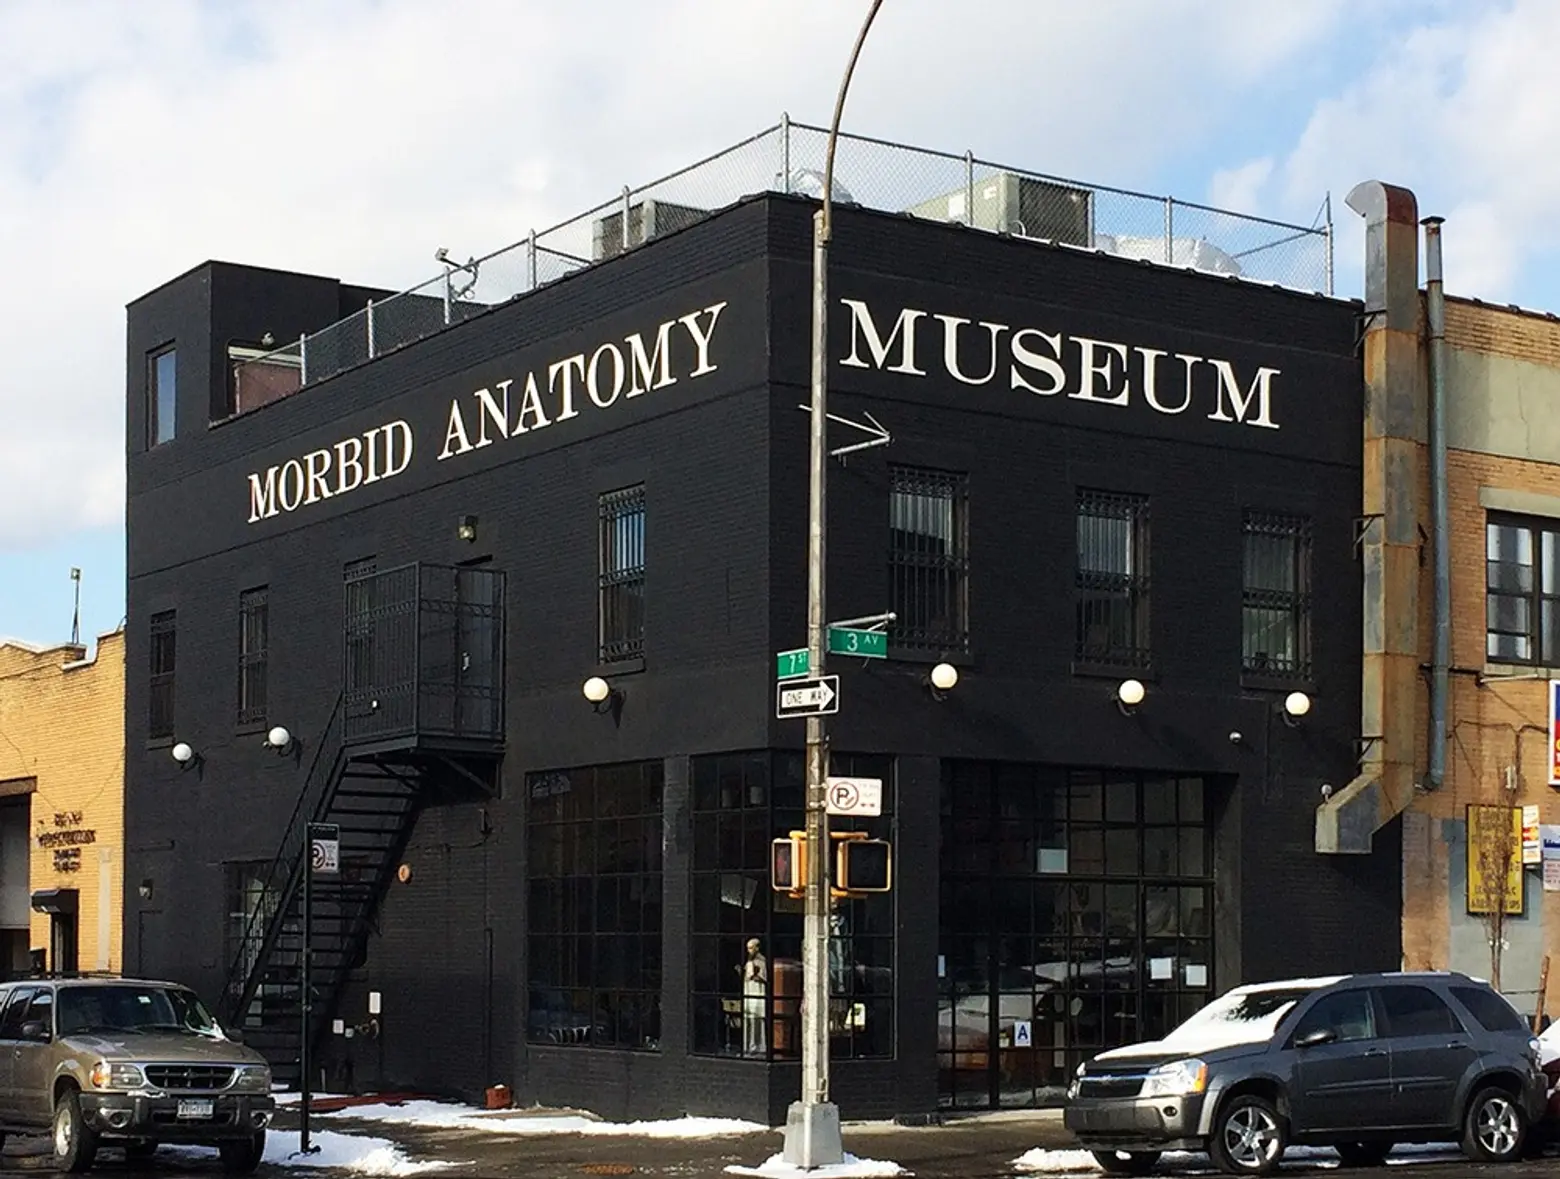 Brooklyn’s Morbid Anatomy Museum has closed; $1 happy hour drinks are probably illegal